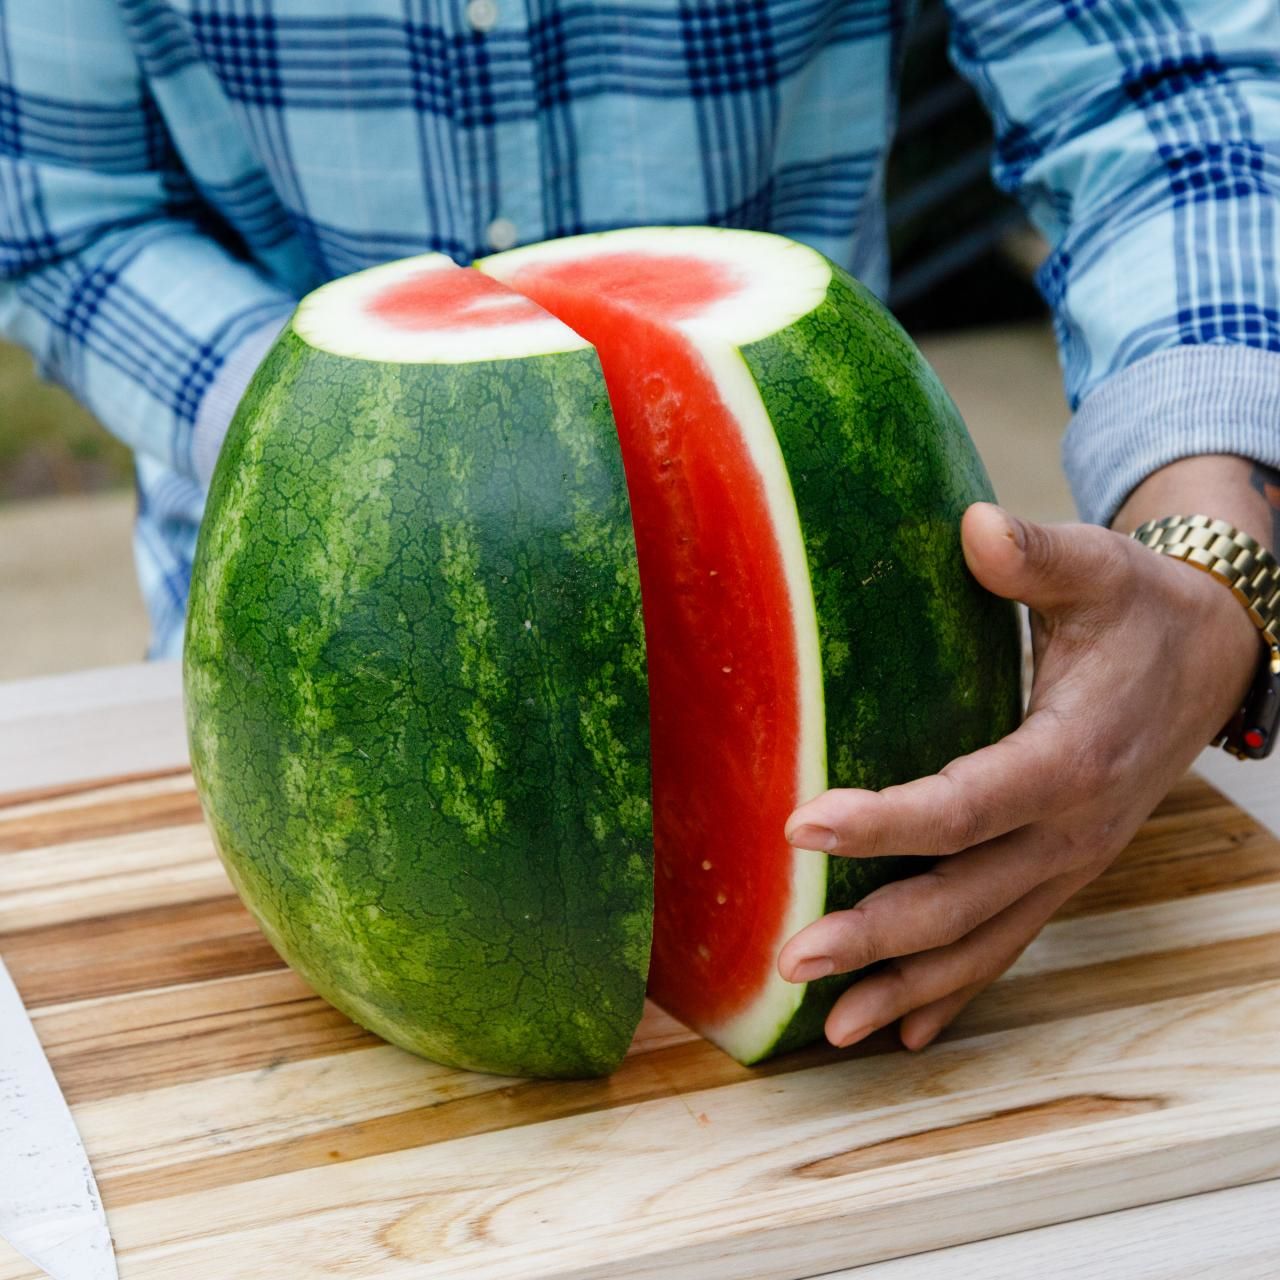 How To Store Half A Watermelon